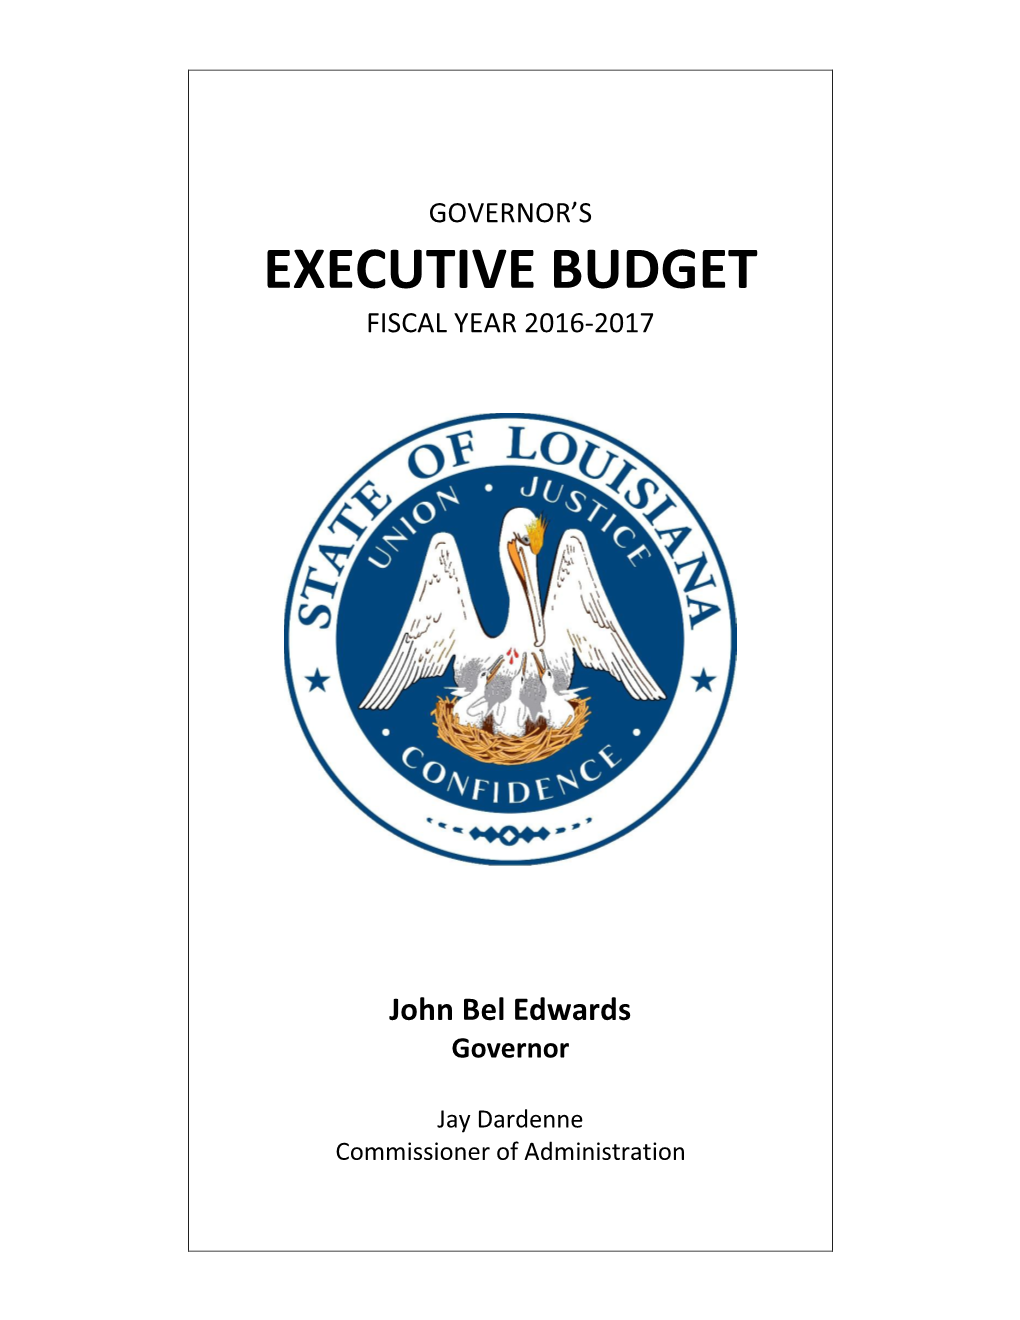 Executive Budget Fiscal Year 2016-2017